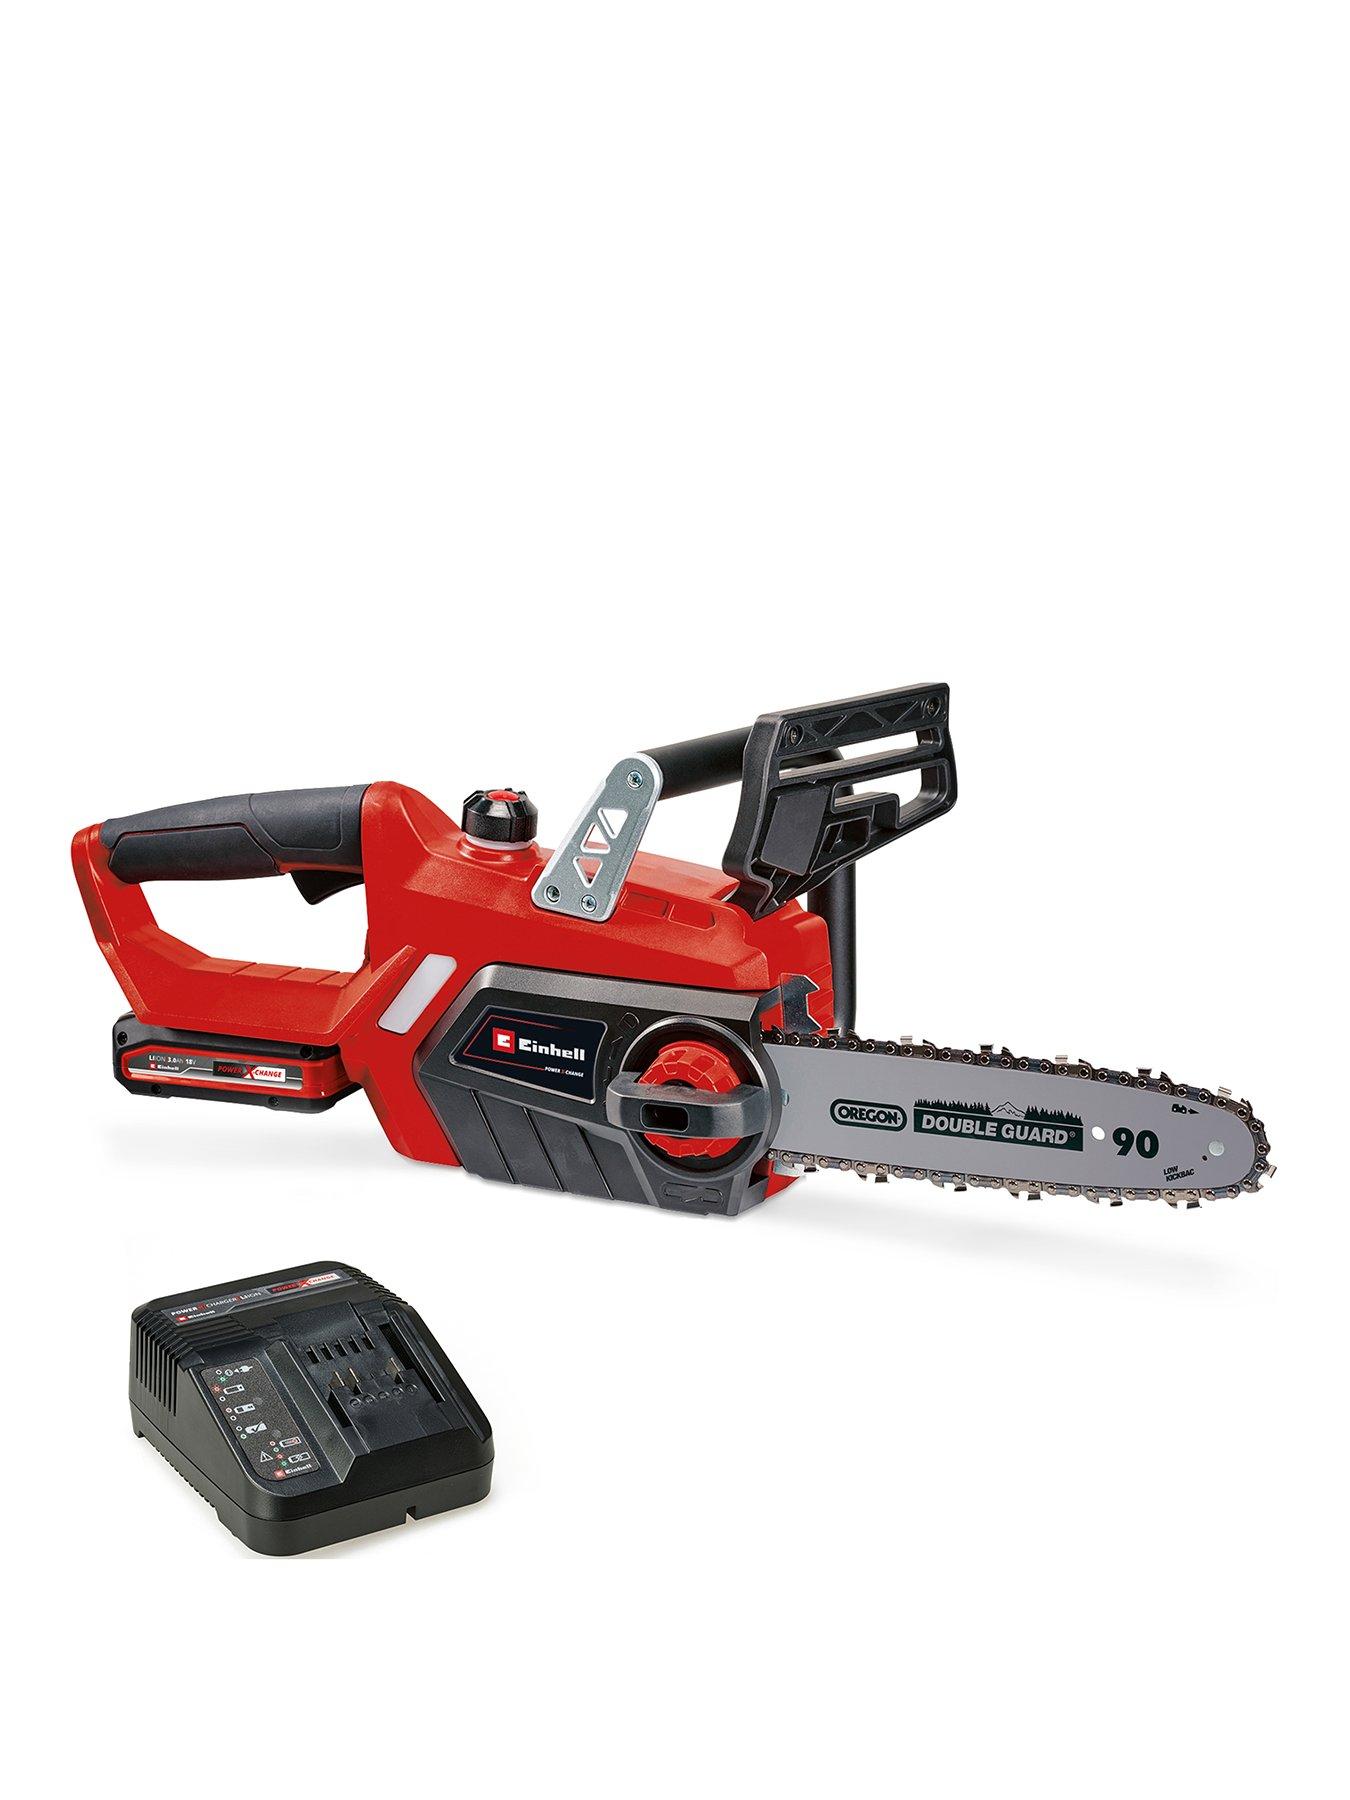 V20* 6-in. Cordless Compact Chainsaw Lopper Kit (2.0Ah)